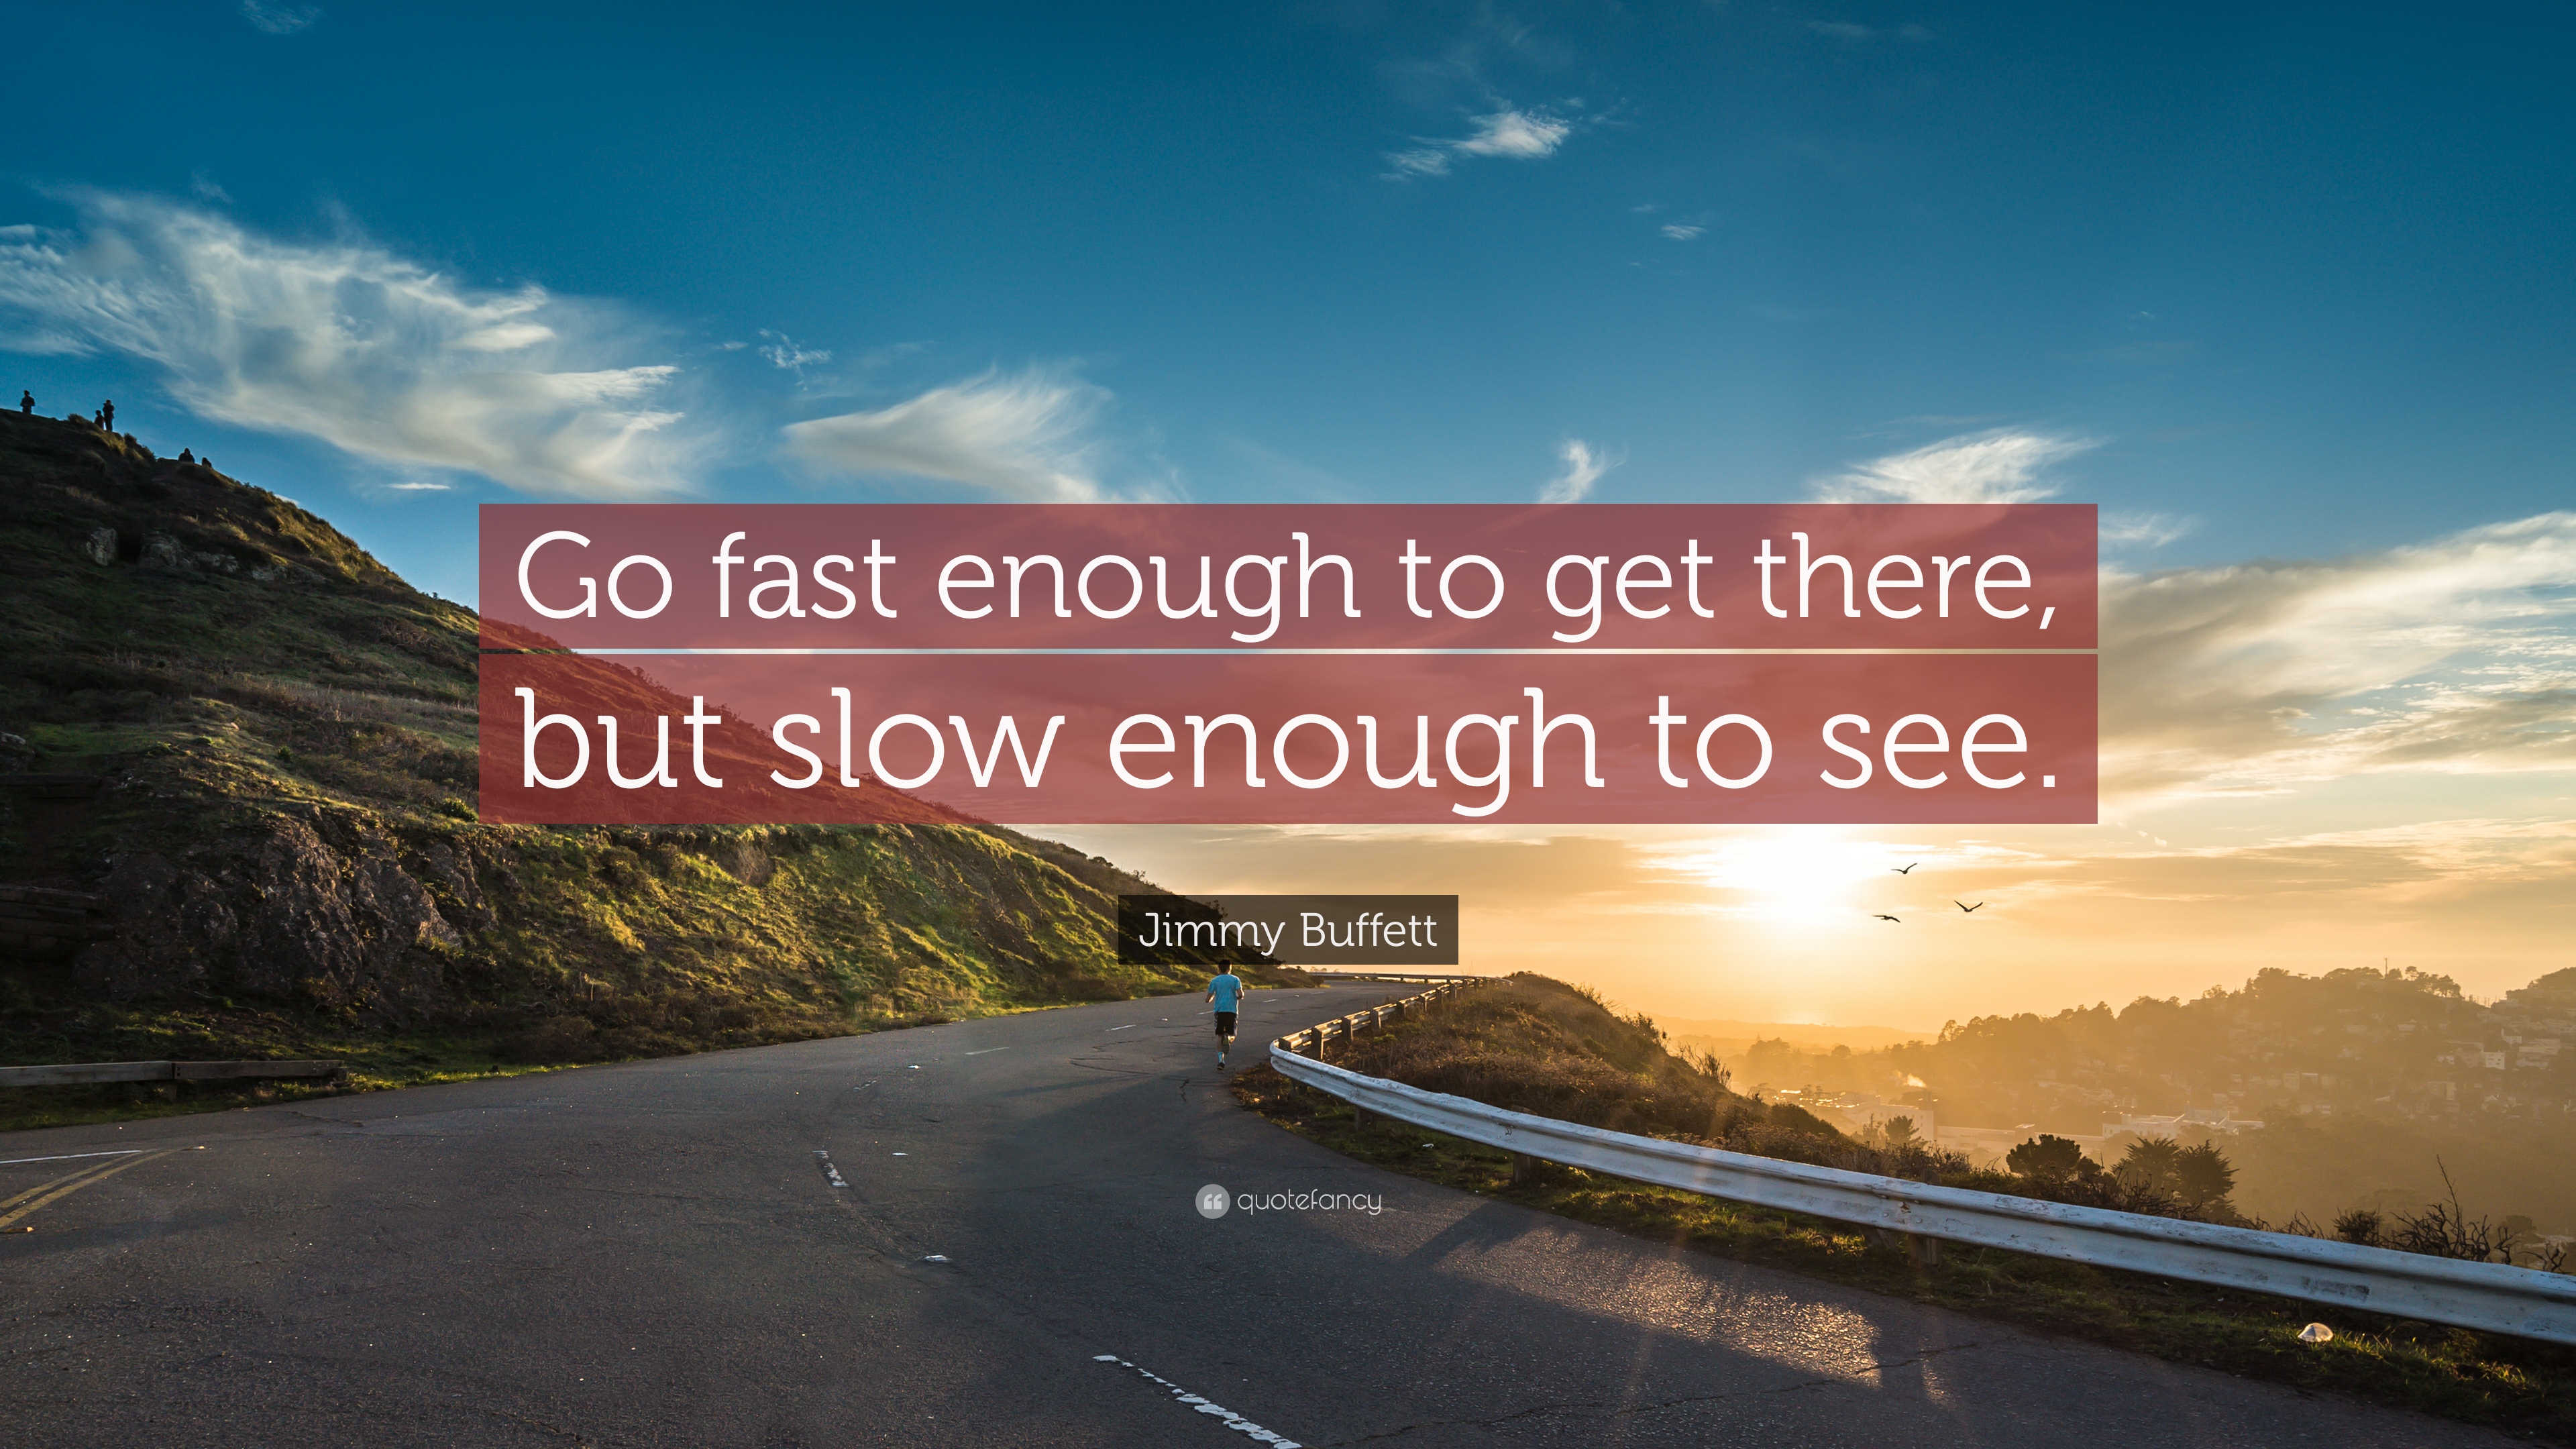 Jimmy Buffett Quote: “Go fast enough to get there, but slow enough ...